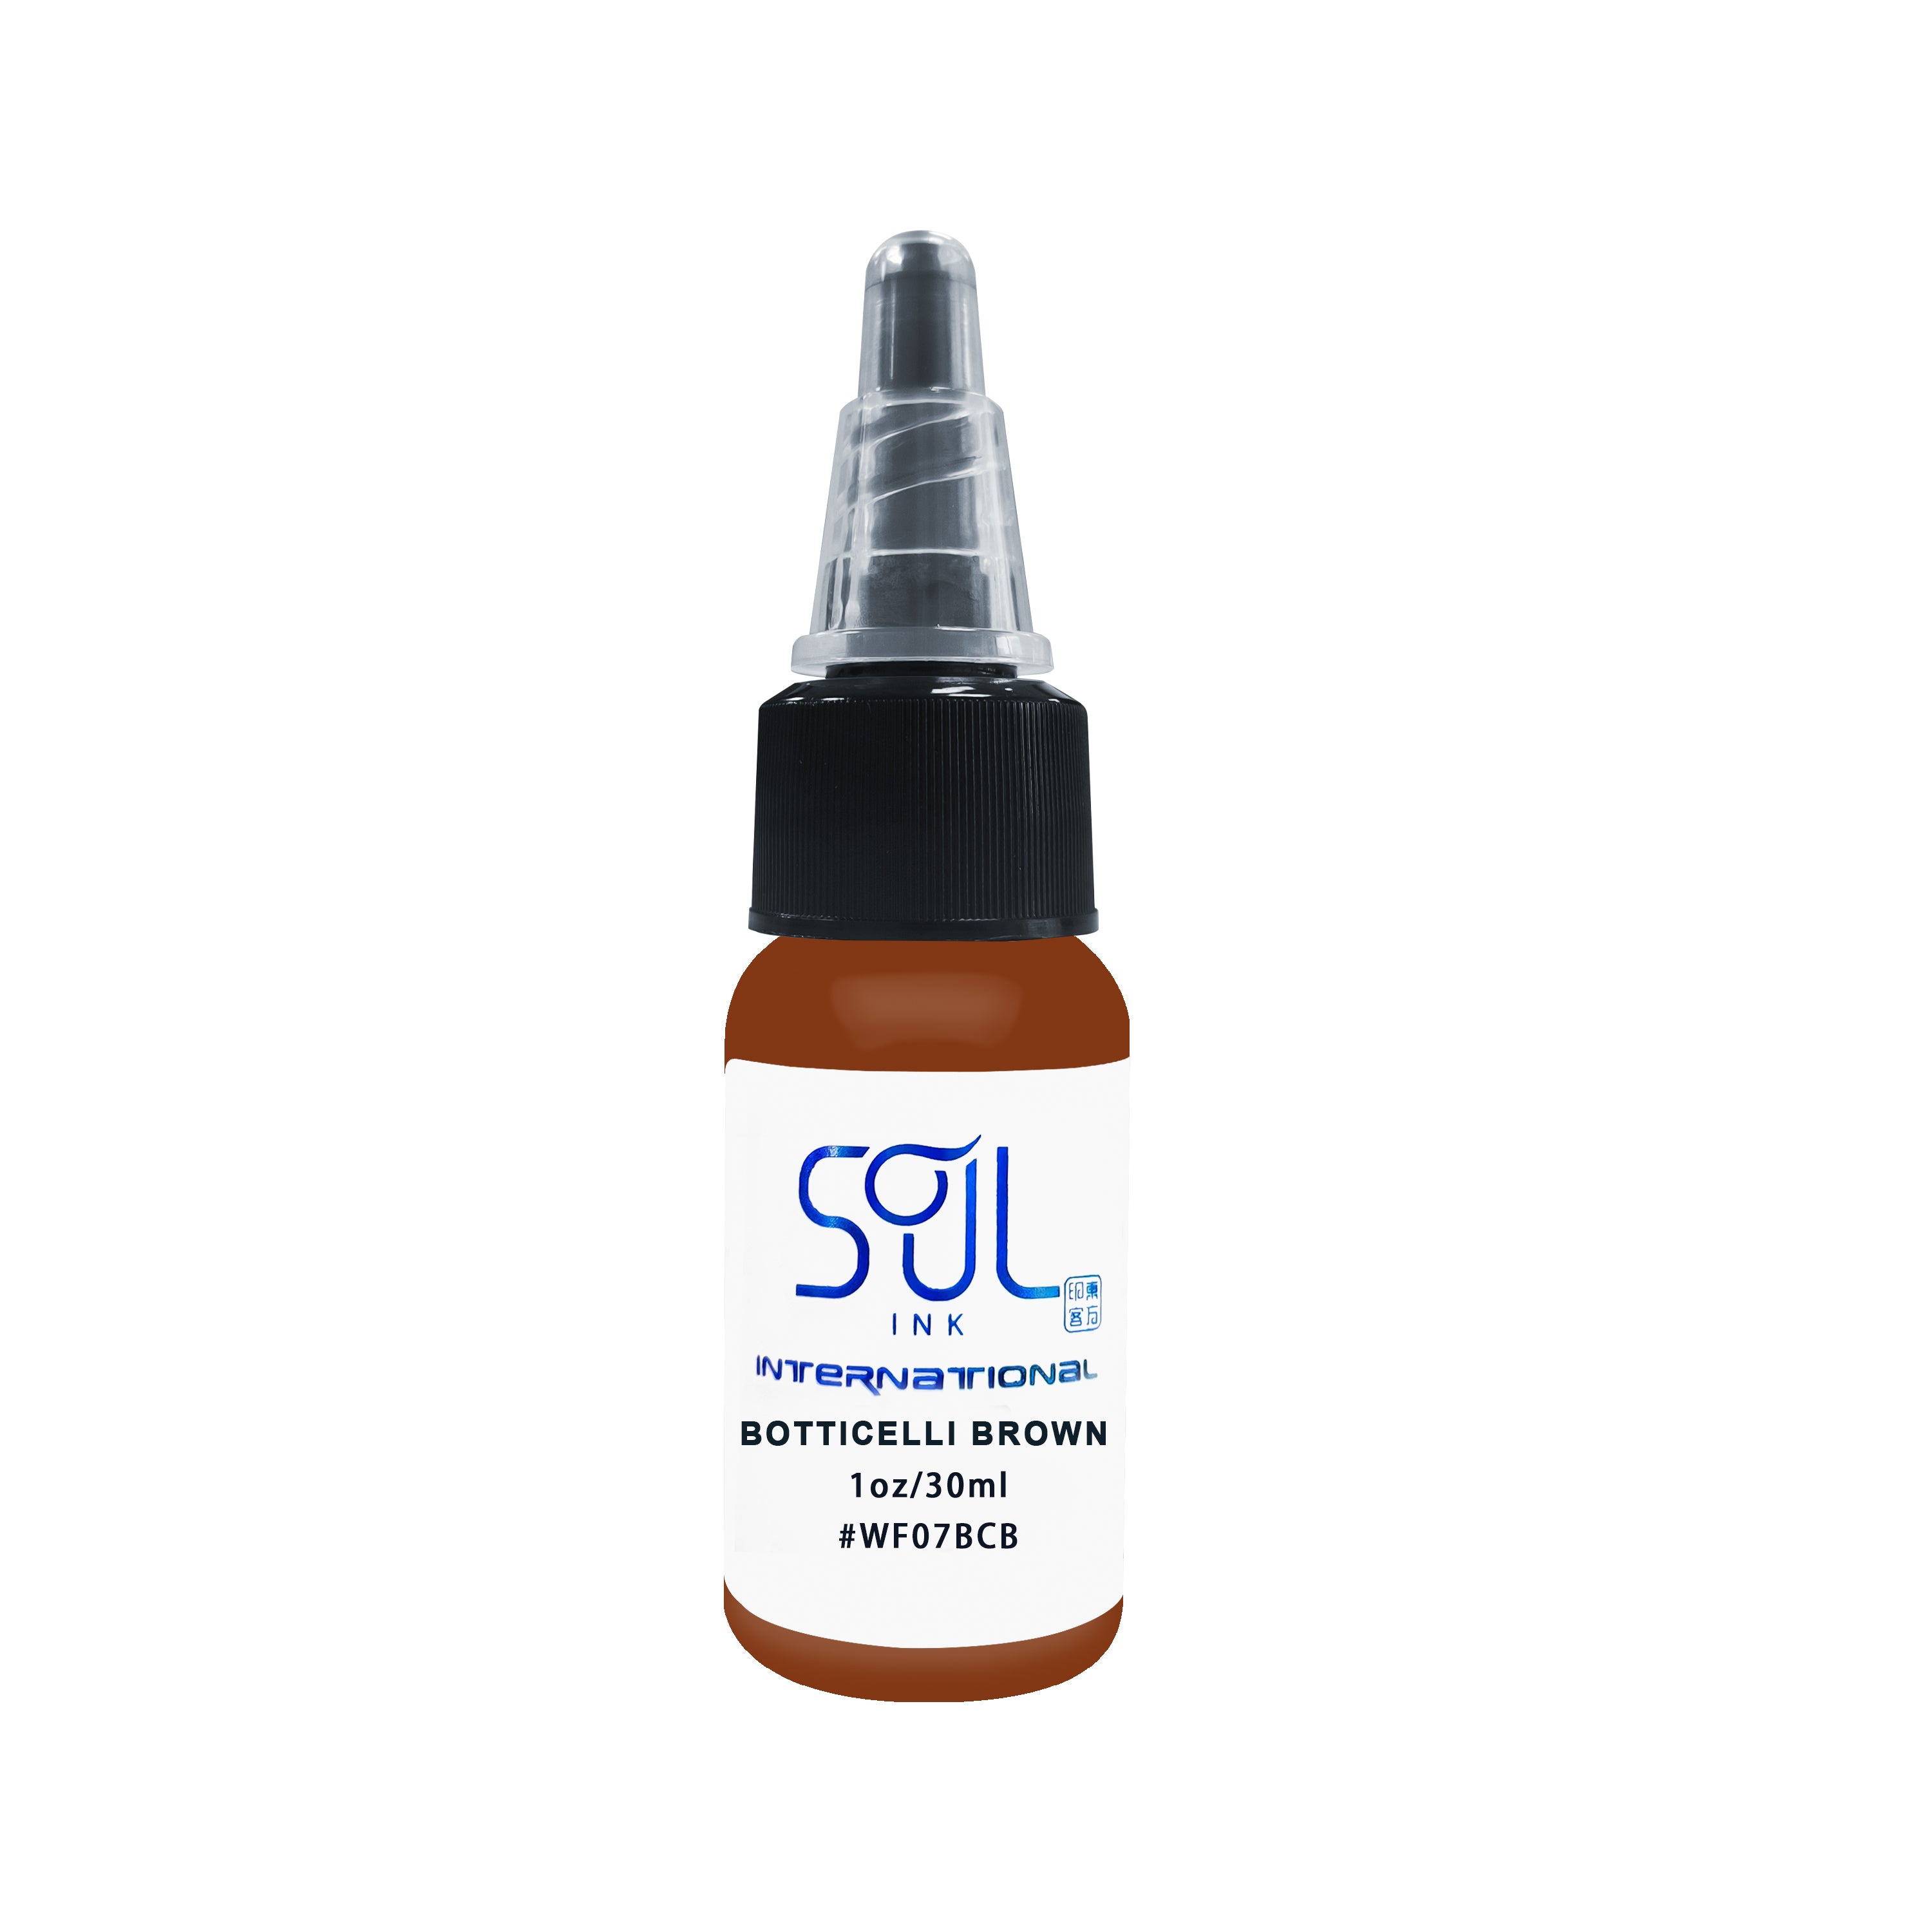 Photograph of a bottle of 'Soul Ink' brand Botticelli brown ink. The label prominently displays the brand name 'Soul Ink' in stylish blue typography against a white background. The Botticelli brown 30 ml bottle with a white label featuring the brands name 'Soul Ink'.